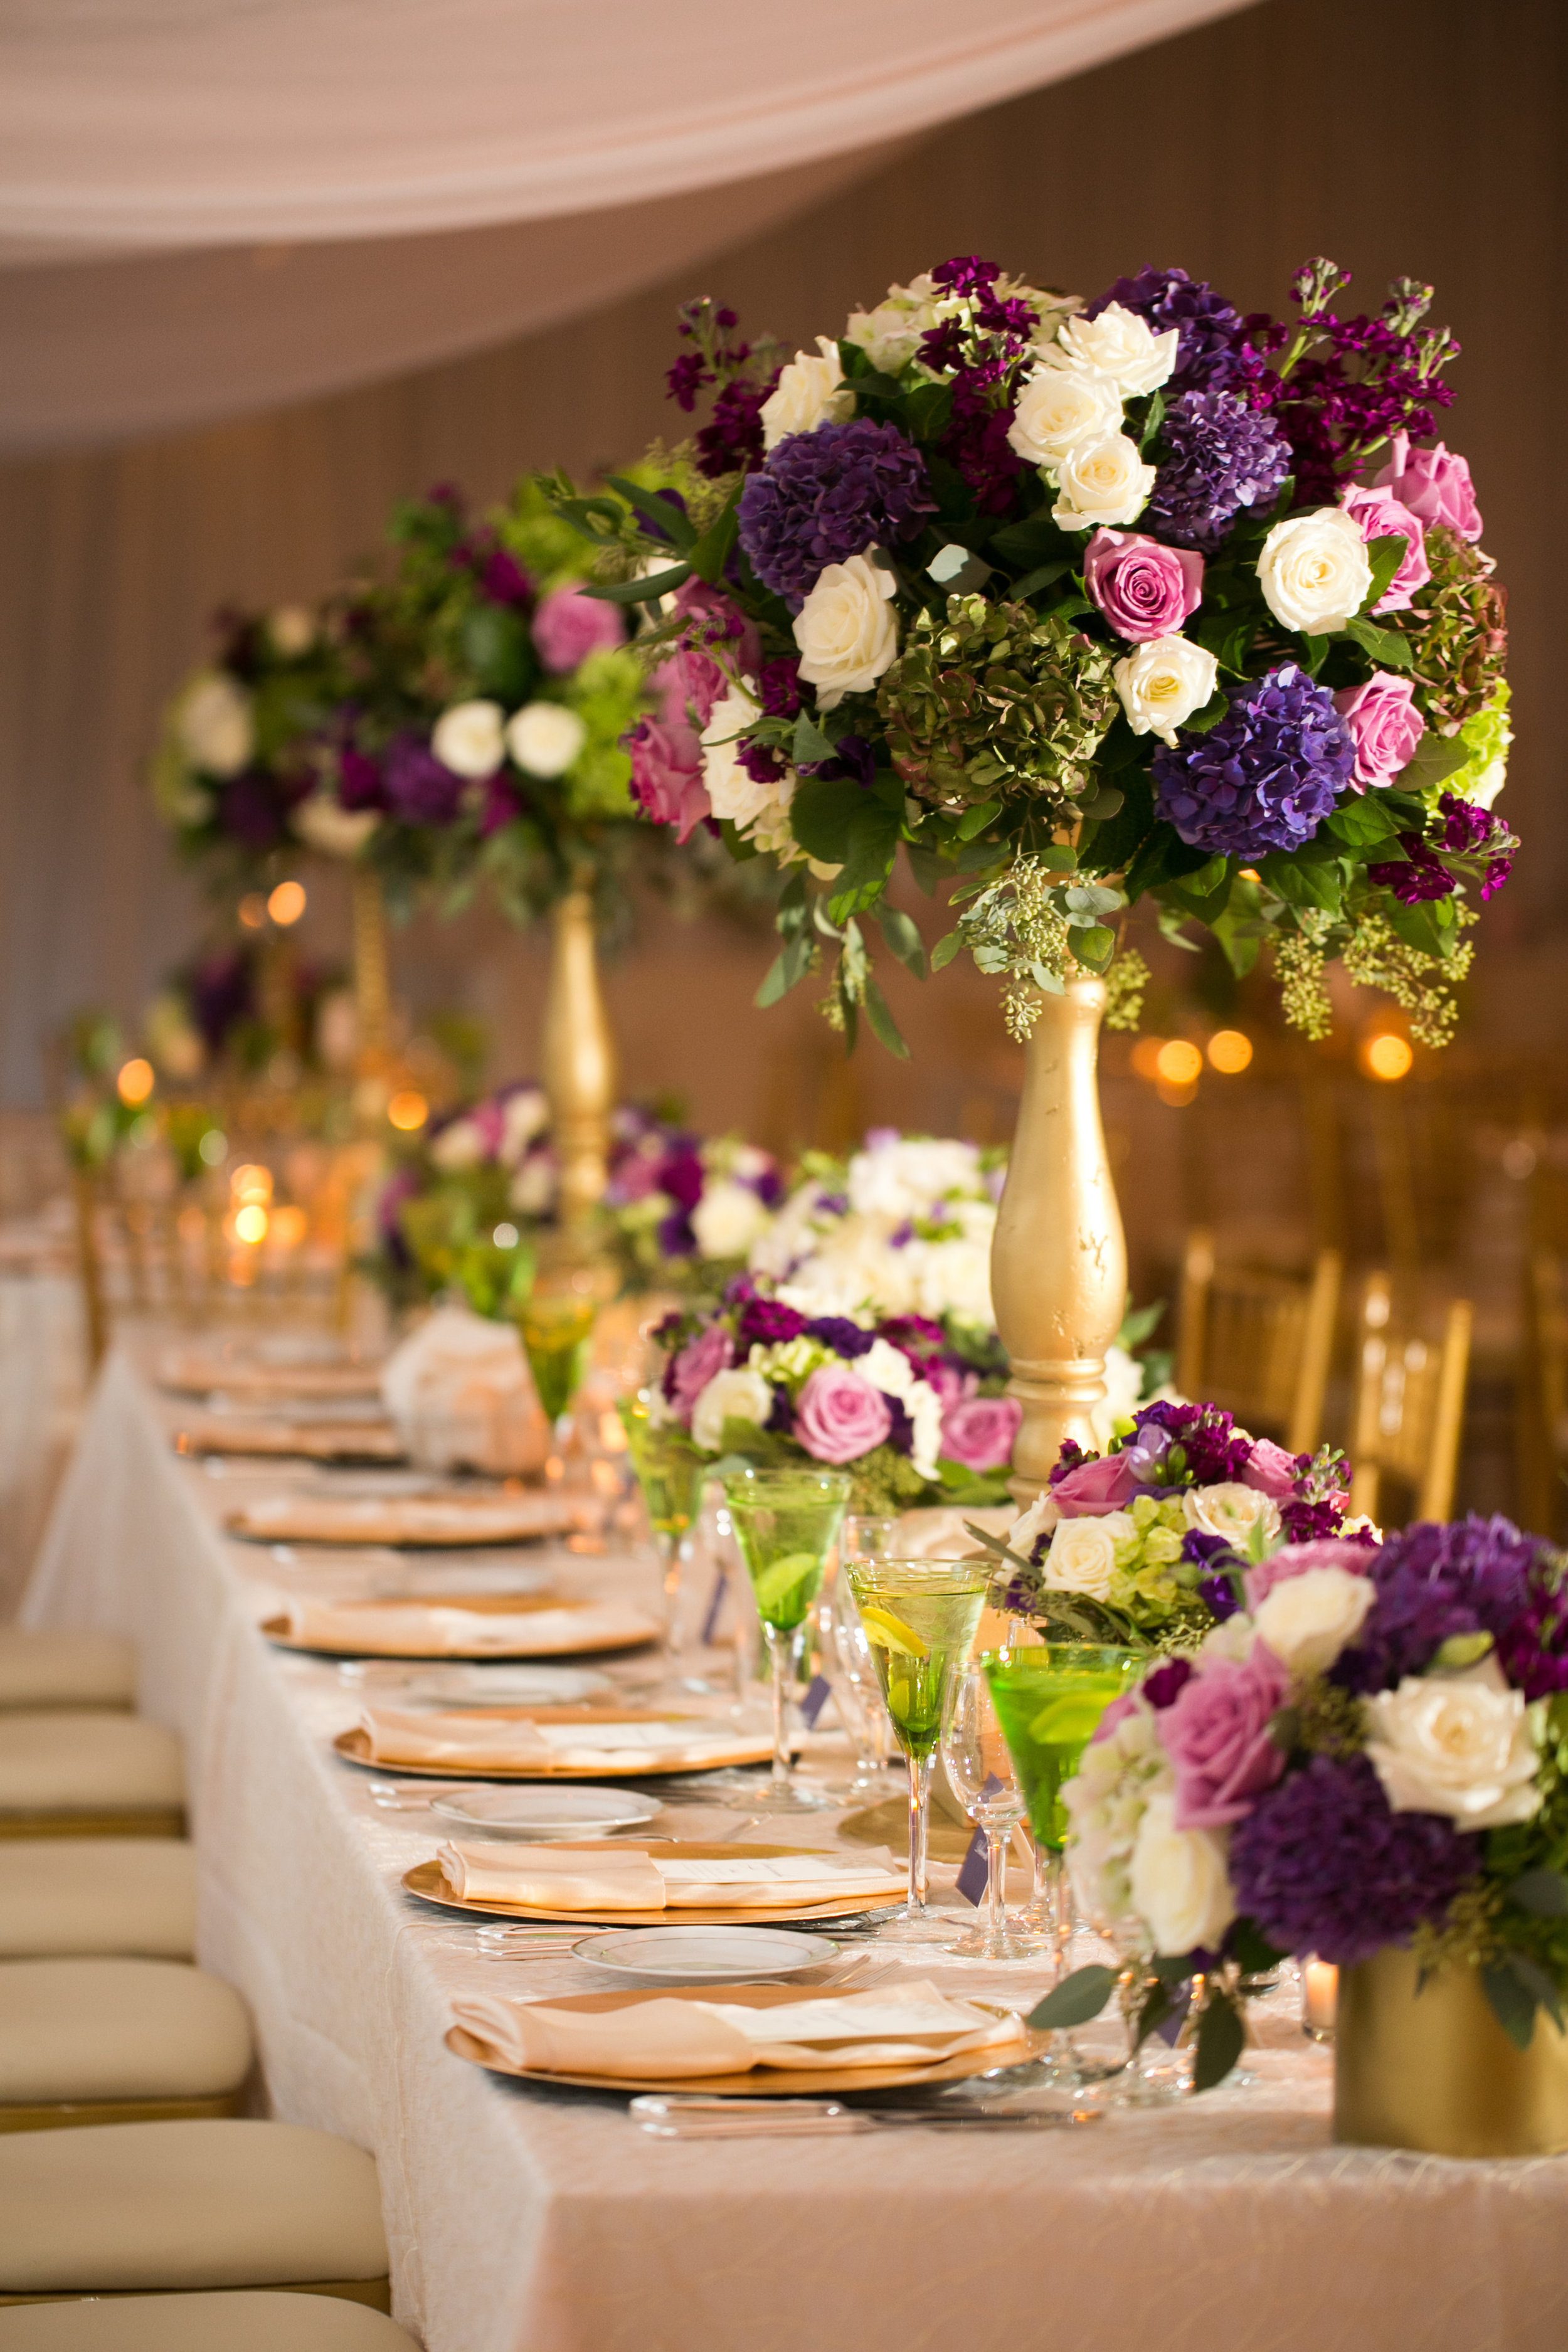 The head-table was TO-DIE-FOR! &nbsp;A mix of high and low with the bridesmaids bouquets added in to make a luxurious and flower-rich look.&nbsp;